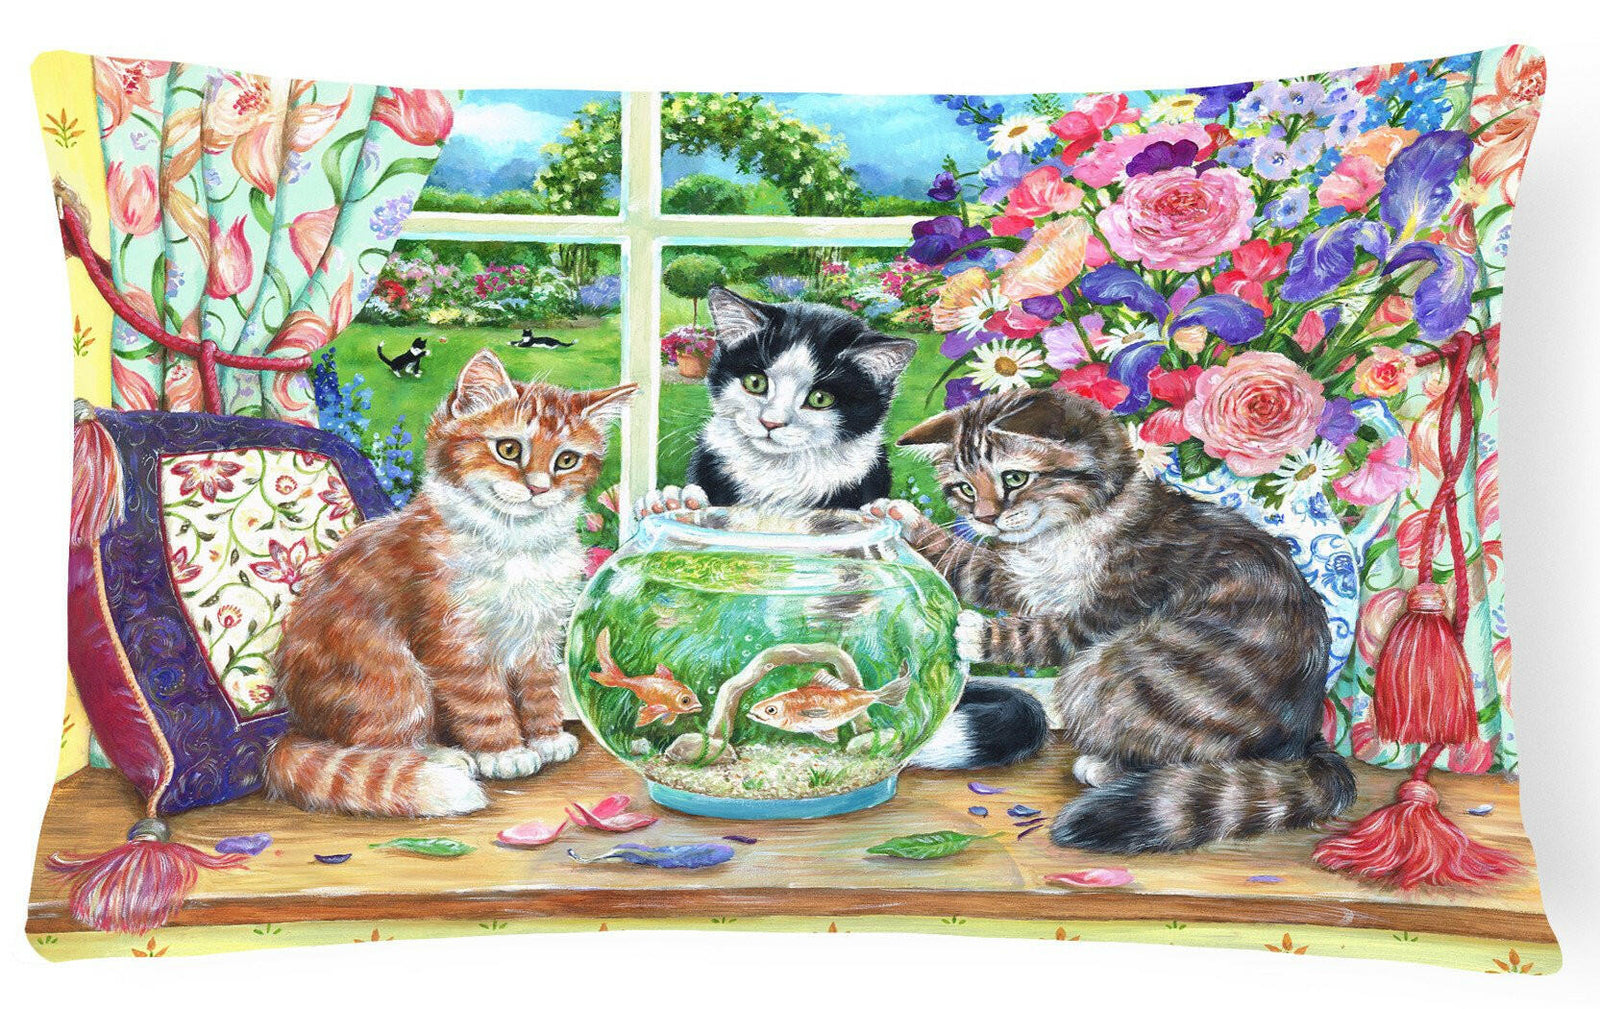 Cats Just Looking in the fish bowl Fabric Decorative Pillow CDCO0325PW1216 by Caroline's Treasures